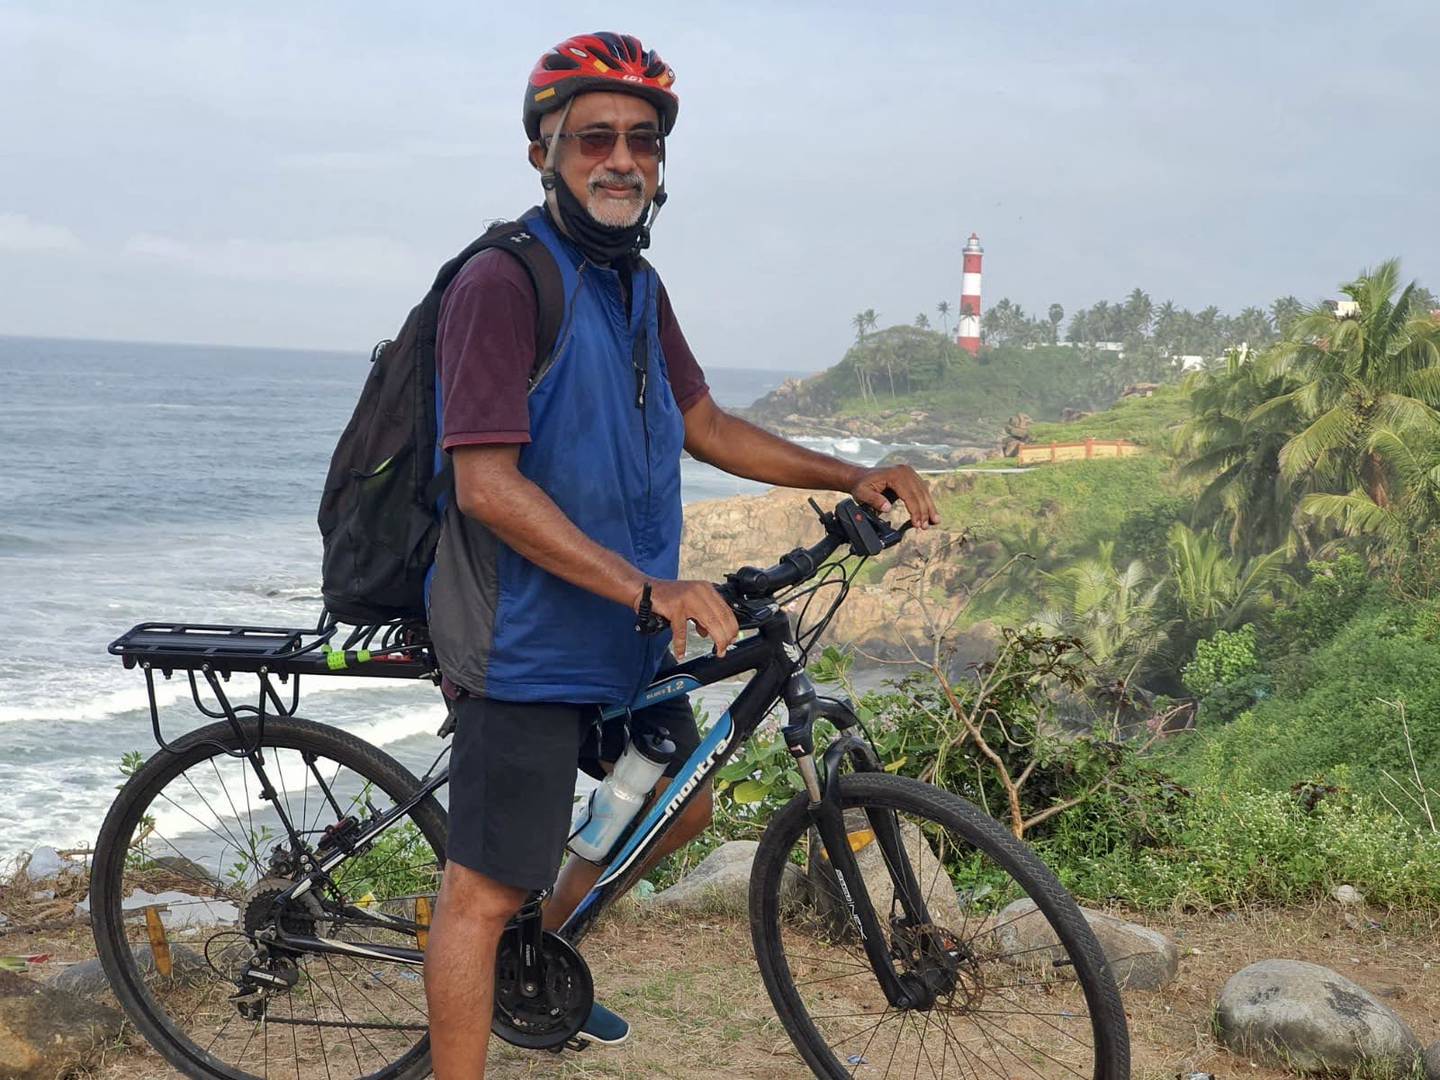 Ayyappan Nair on his trusted Indian-made bicycle. Photo: Tom Anthony